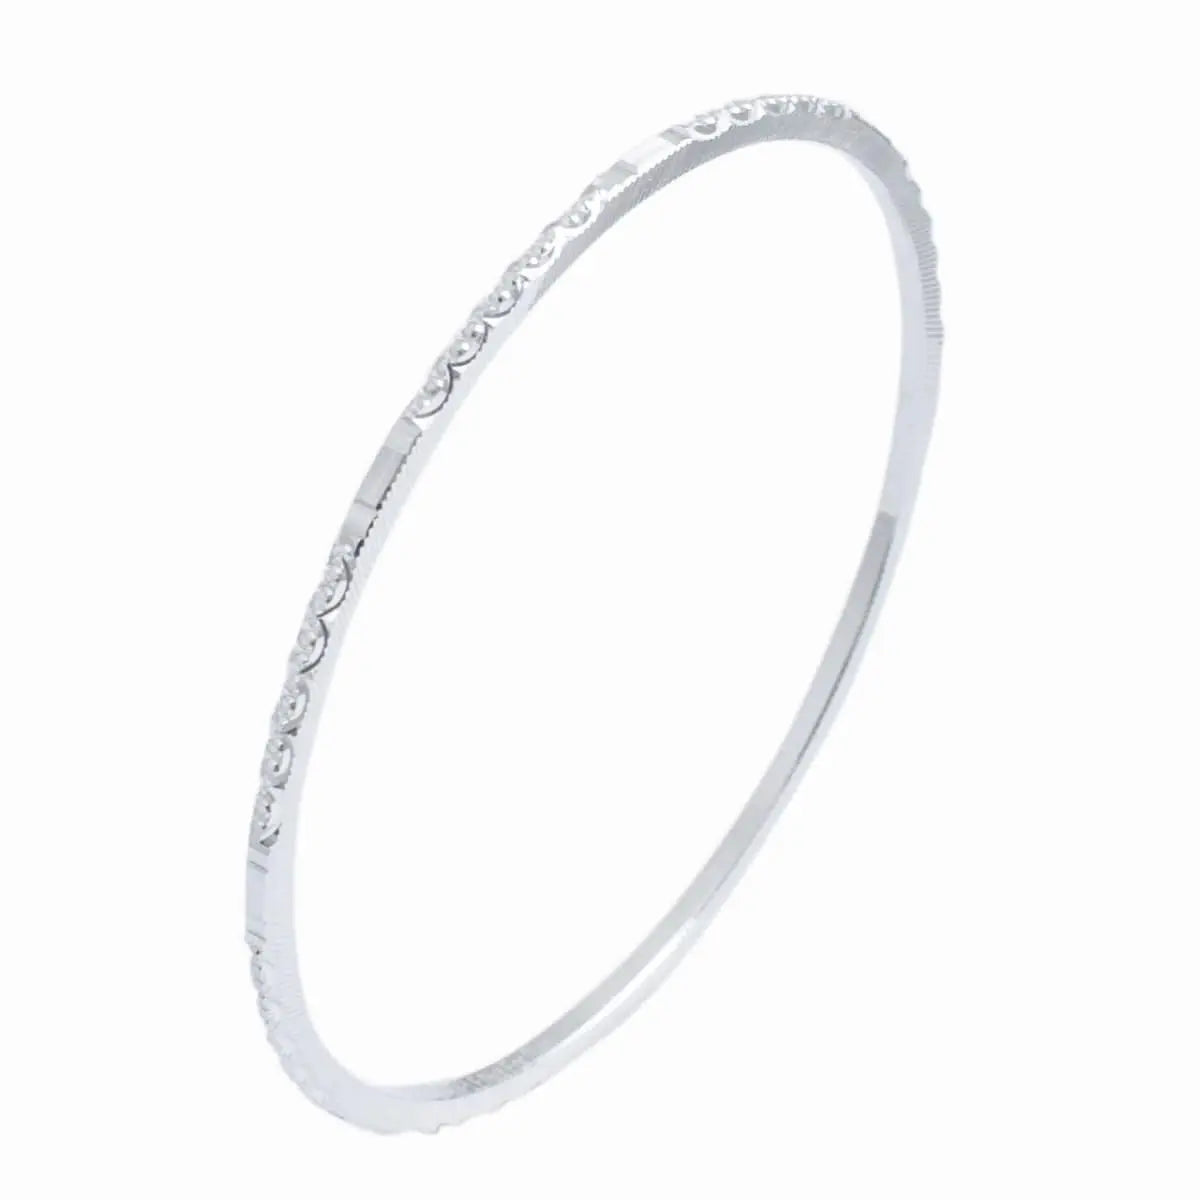 Buy White Gold Bracelet Designs Online in India | Candere by Kalyan  Jewellers